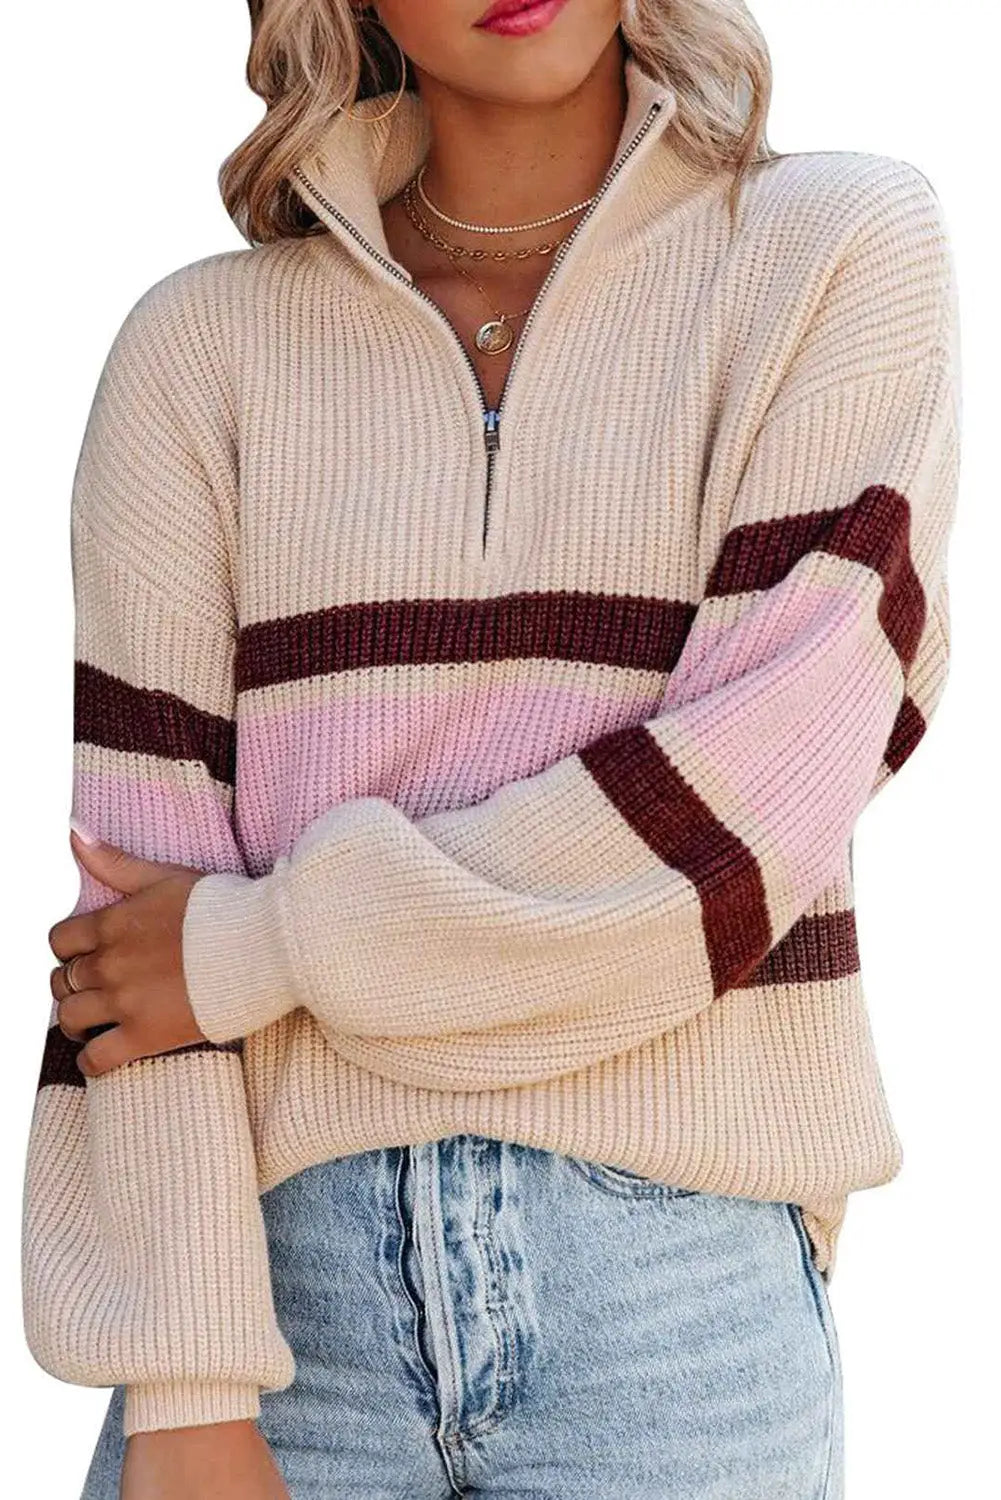 Apricot striped color block knit zip collared sweater - tops